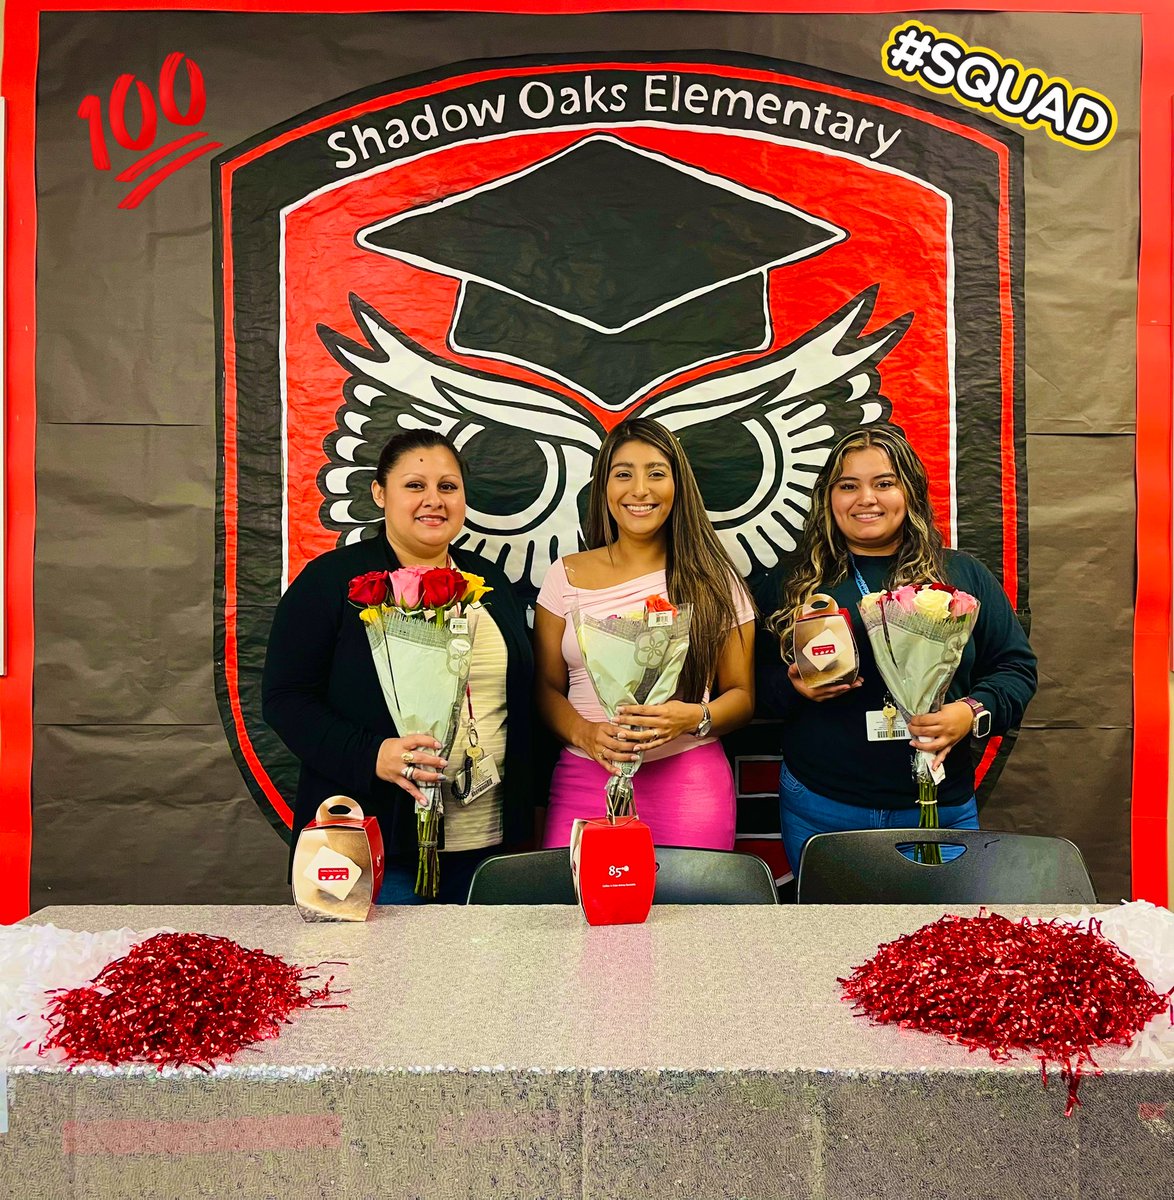 @ShadowOaksOwls is recognizing their Administrative Professionals today. Their hard work and support for the campus and community is deeply appreciated. Thank you for helping us own our excellence everyday!!! @SBISD @jennifer_blaine @MJenParker #ScholarsOwningExcellence